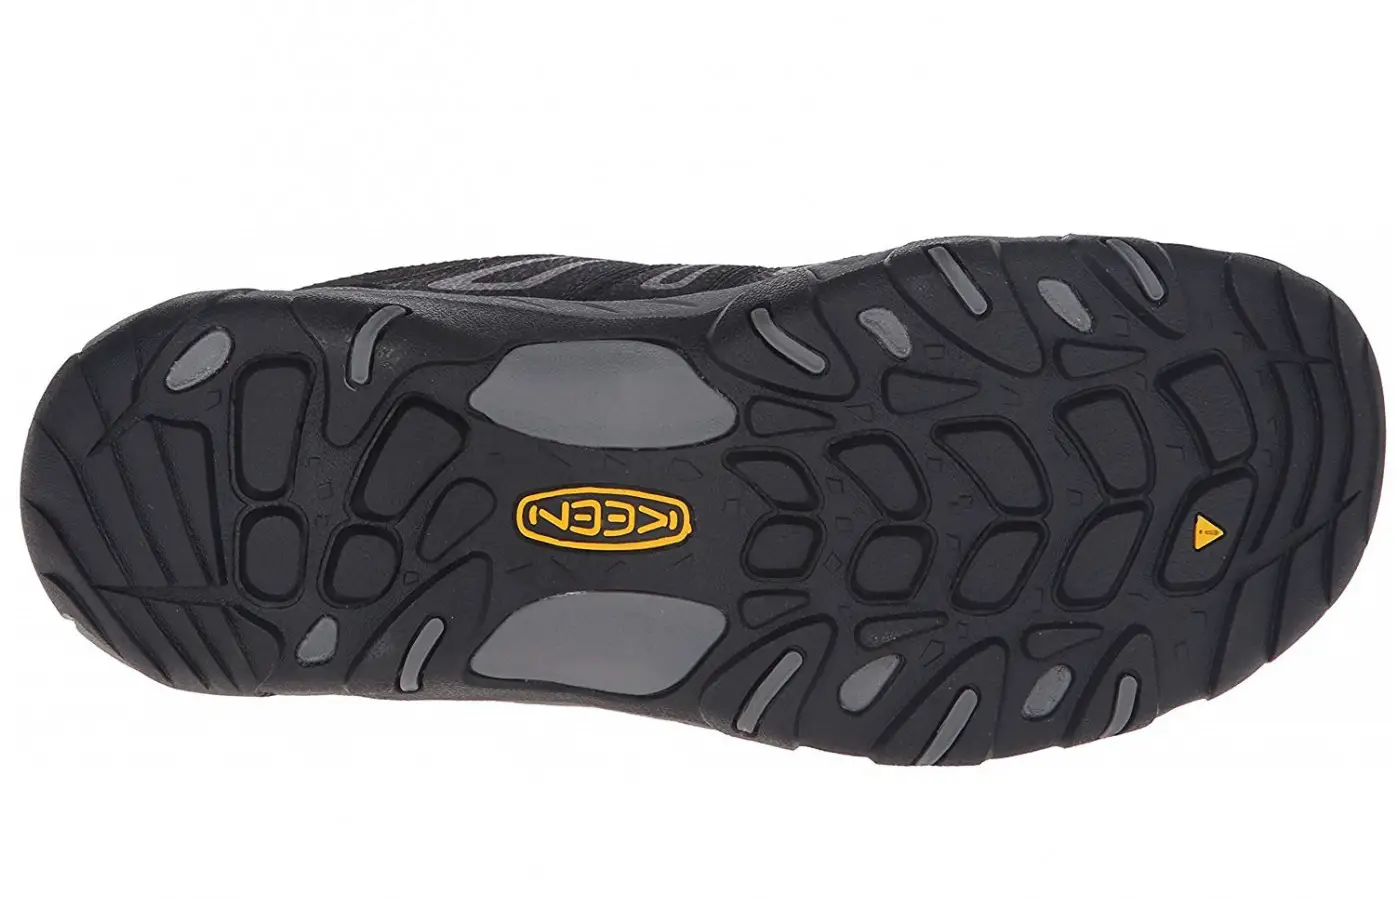 The Keen Oakridge offers a non-marking outsole in order to provide good traction and protection to floors.